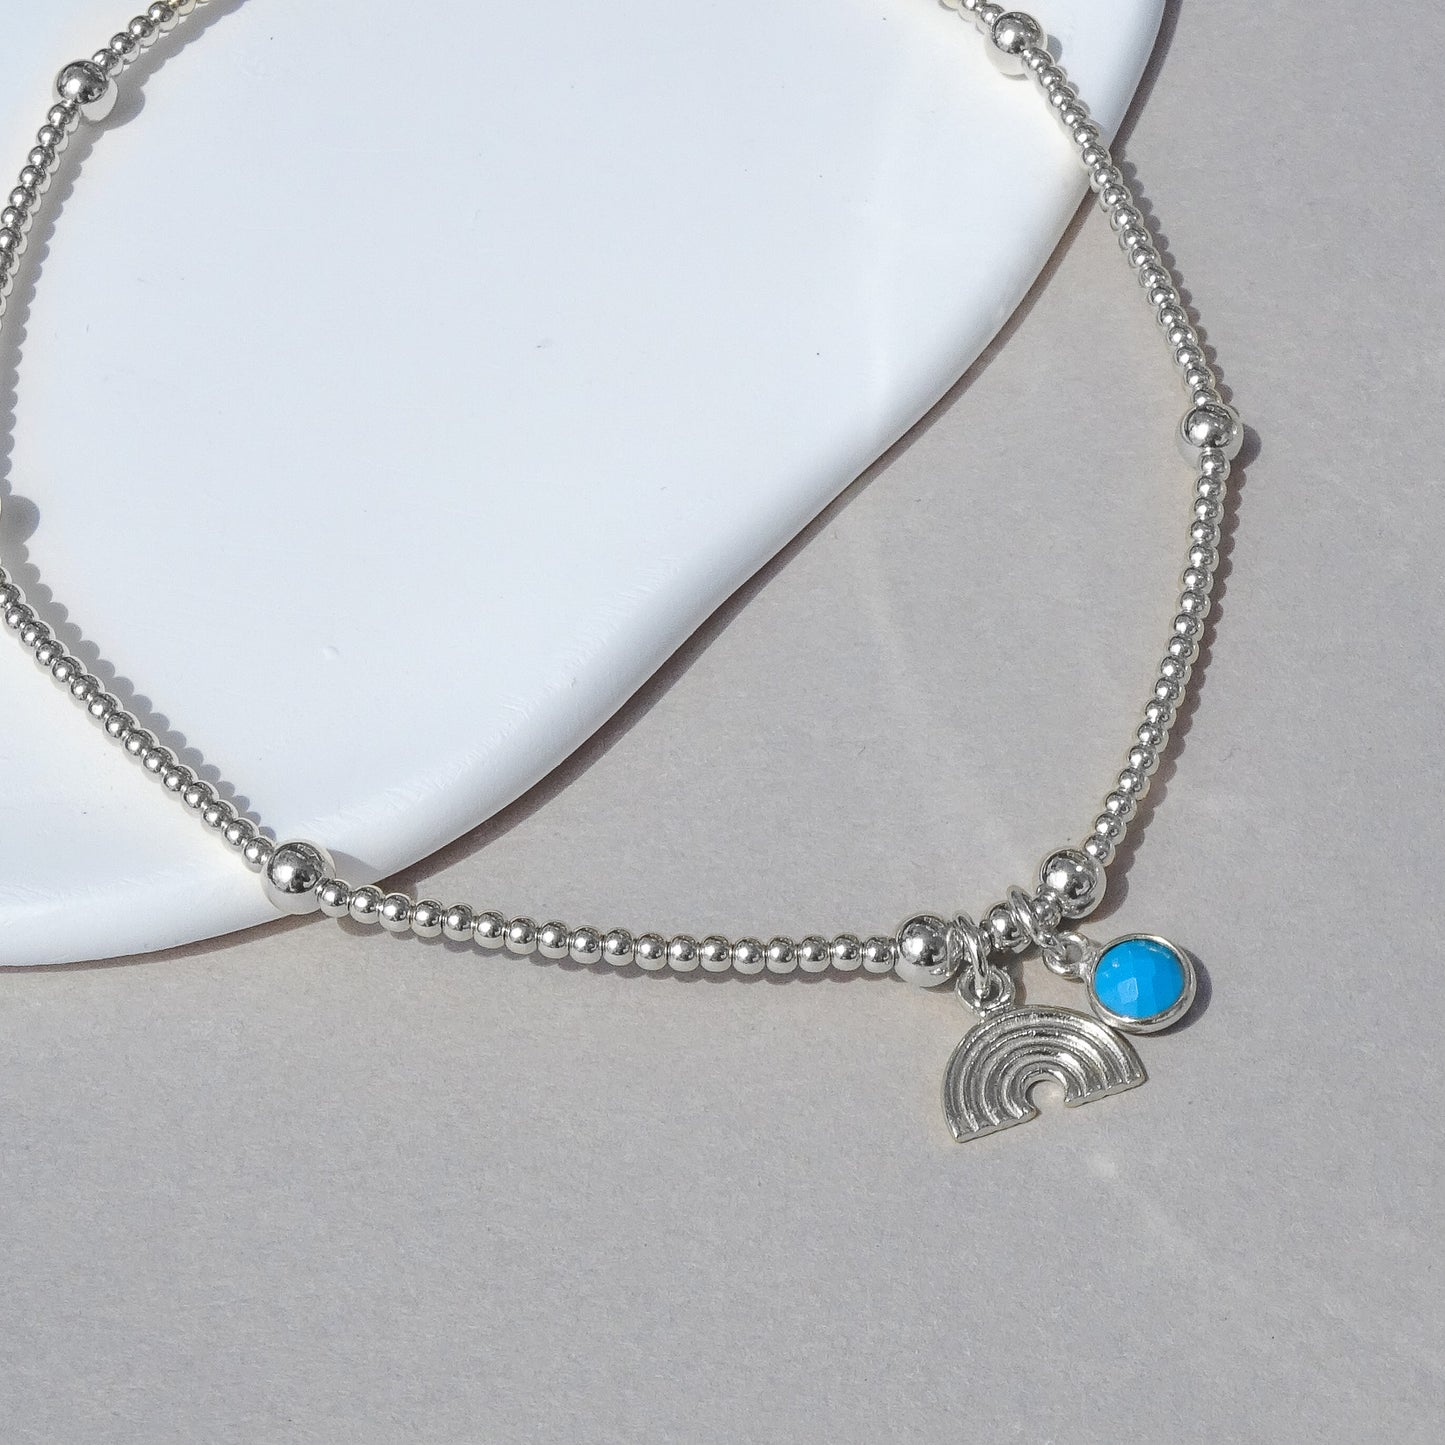 Miracle Rainbow Charm Charity Anklet/Bracelet